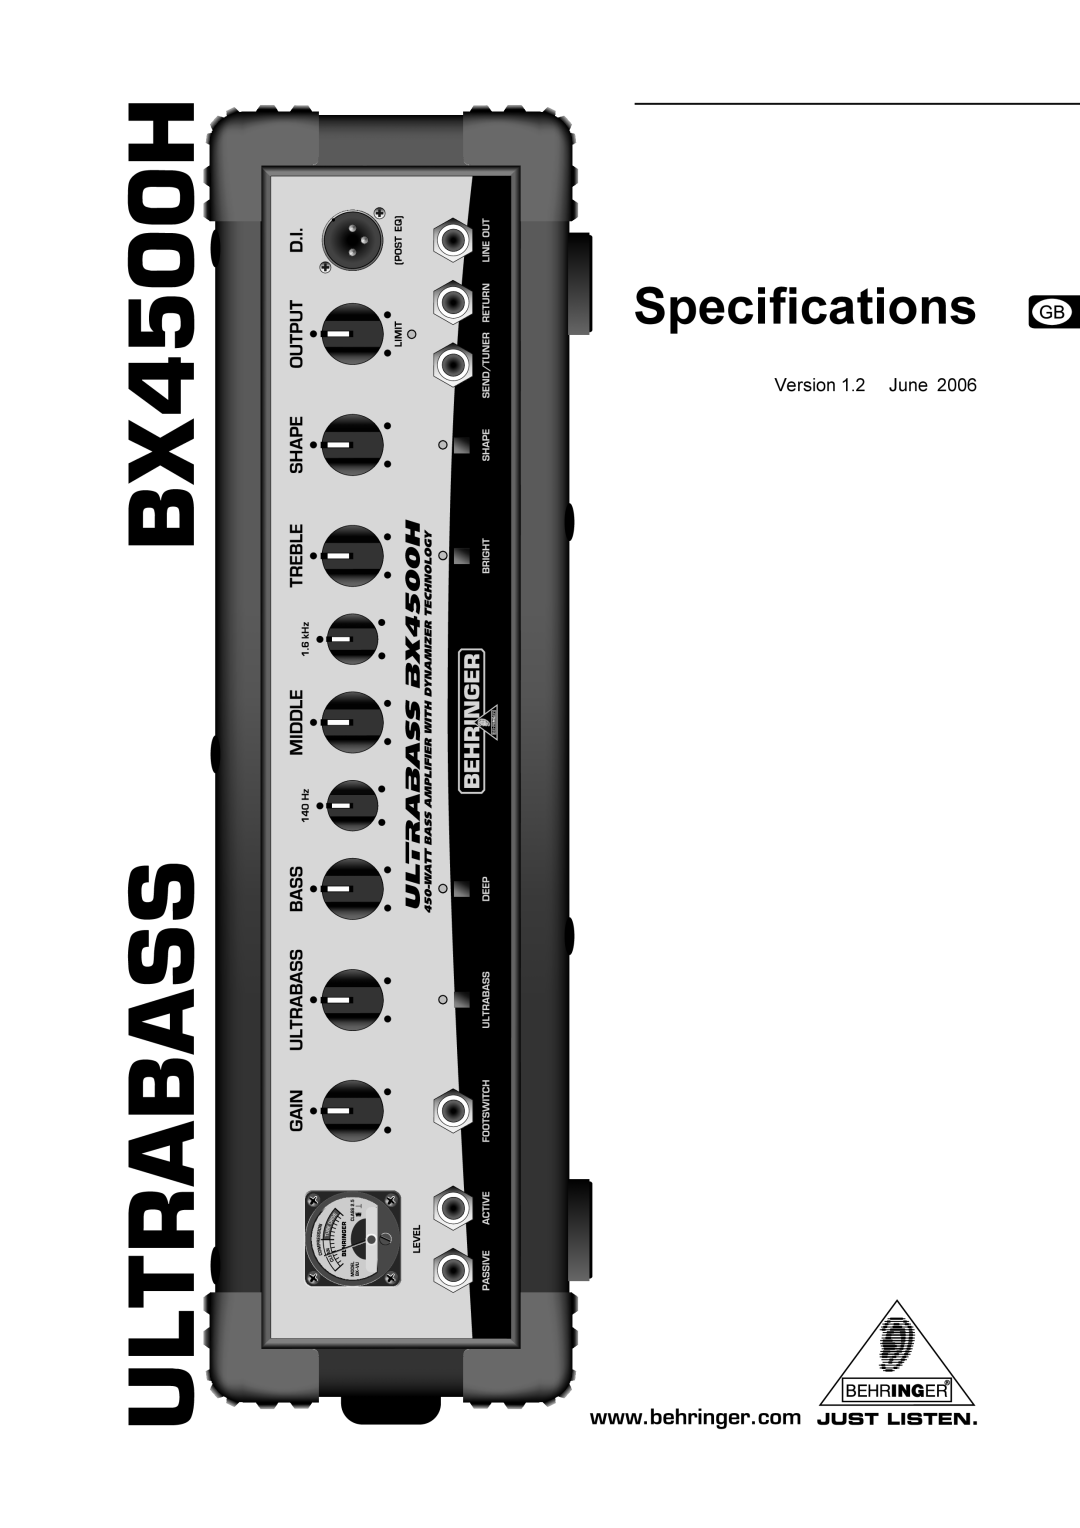 Behringer BX4500H specifications Ultrabass, Specifications 